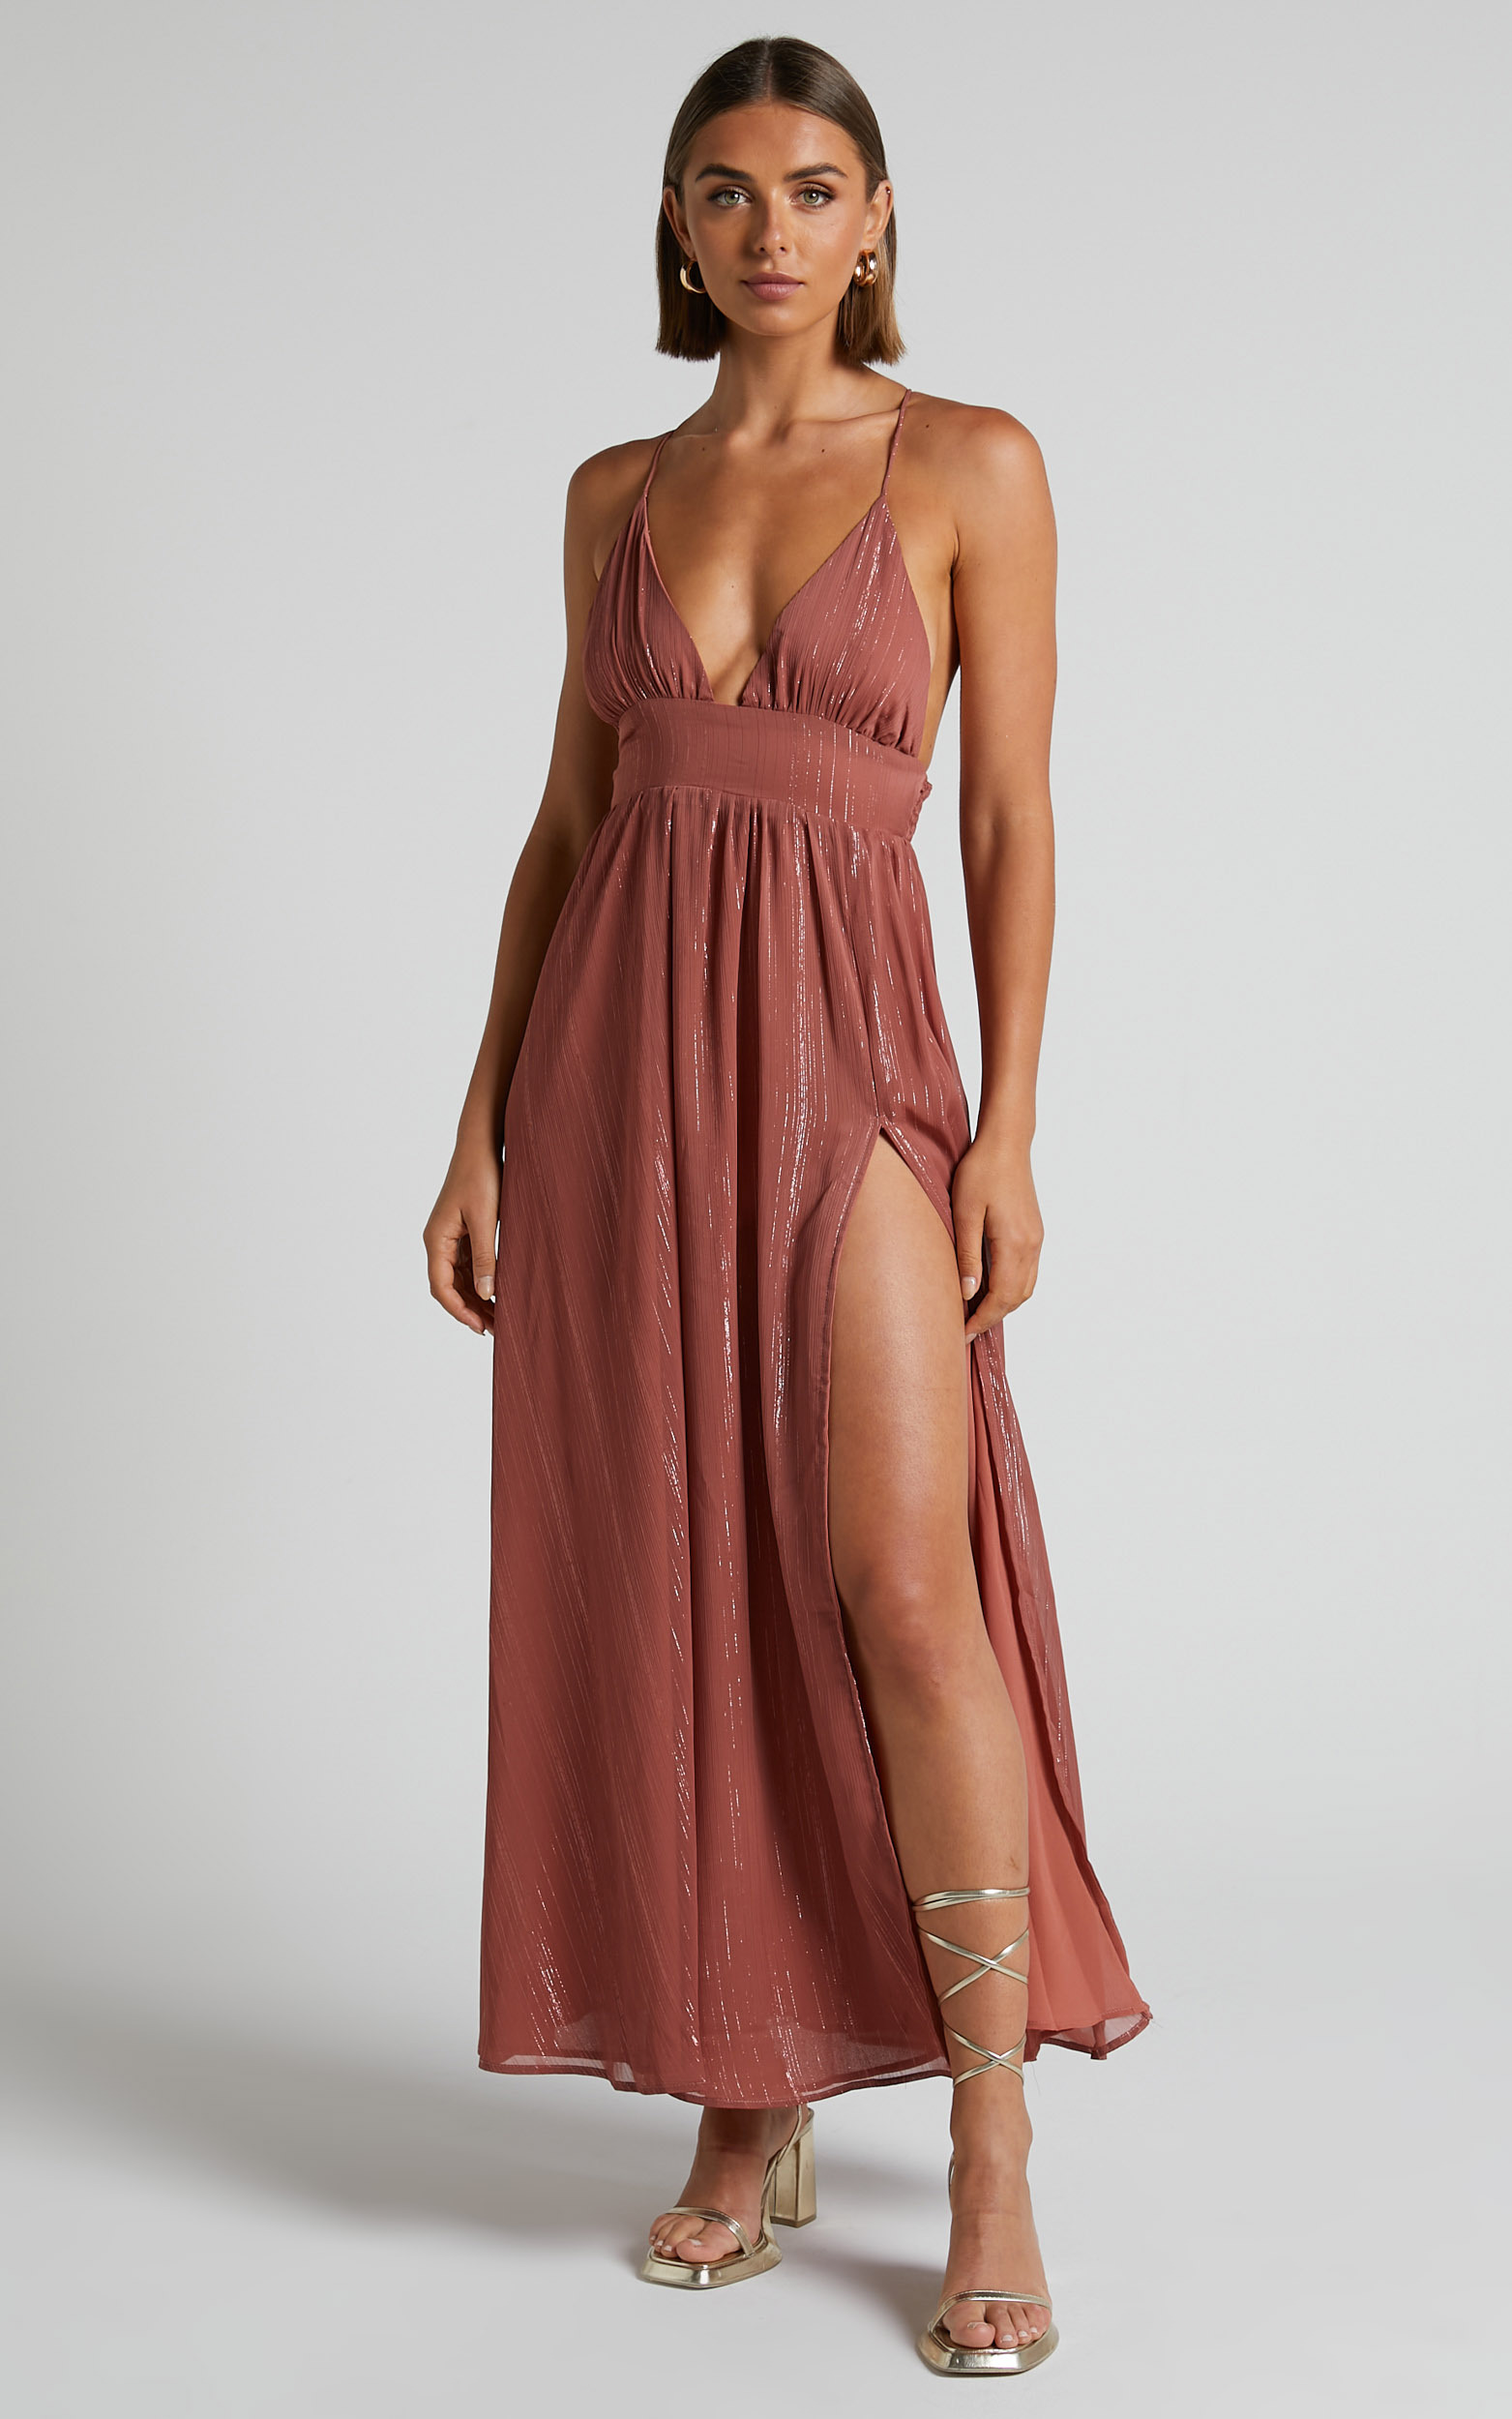 Indiana Gathered Plunge Maxi Dress in Dusty Rose - 06, PNK1, hi-res image number null